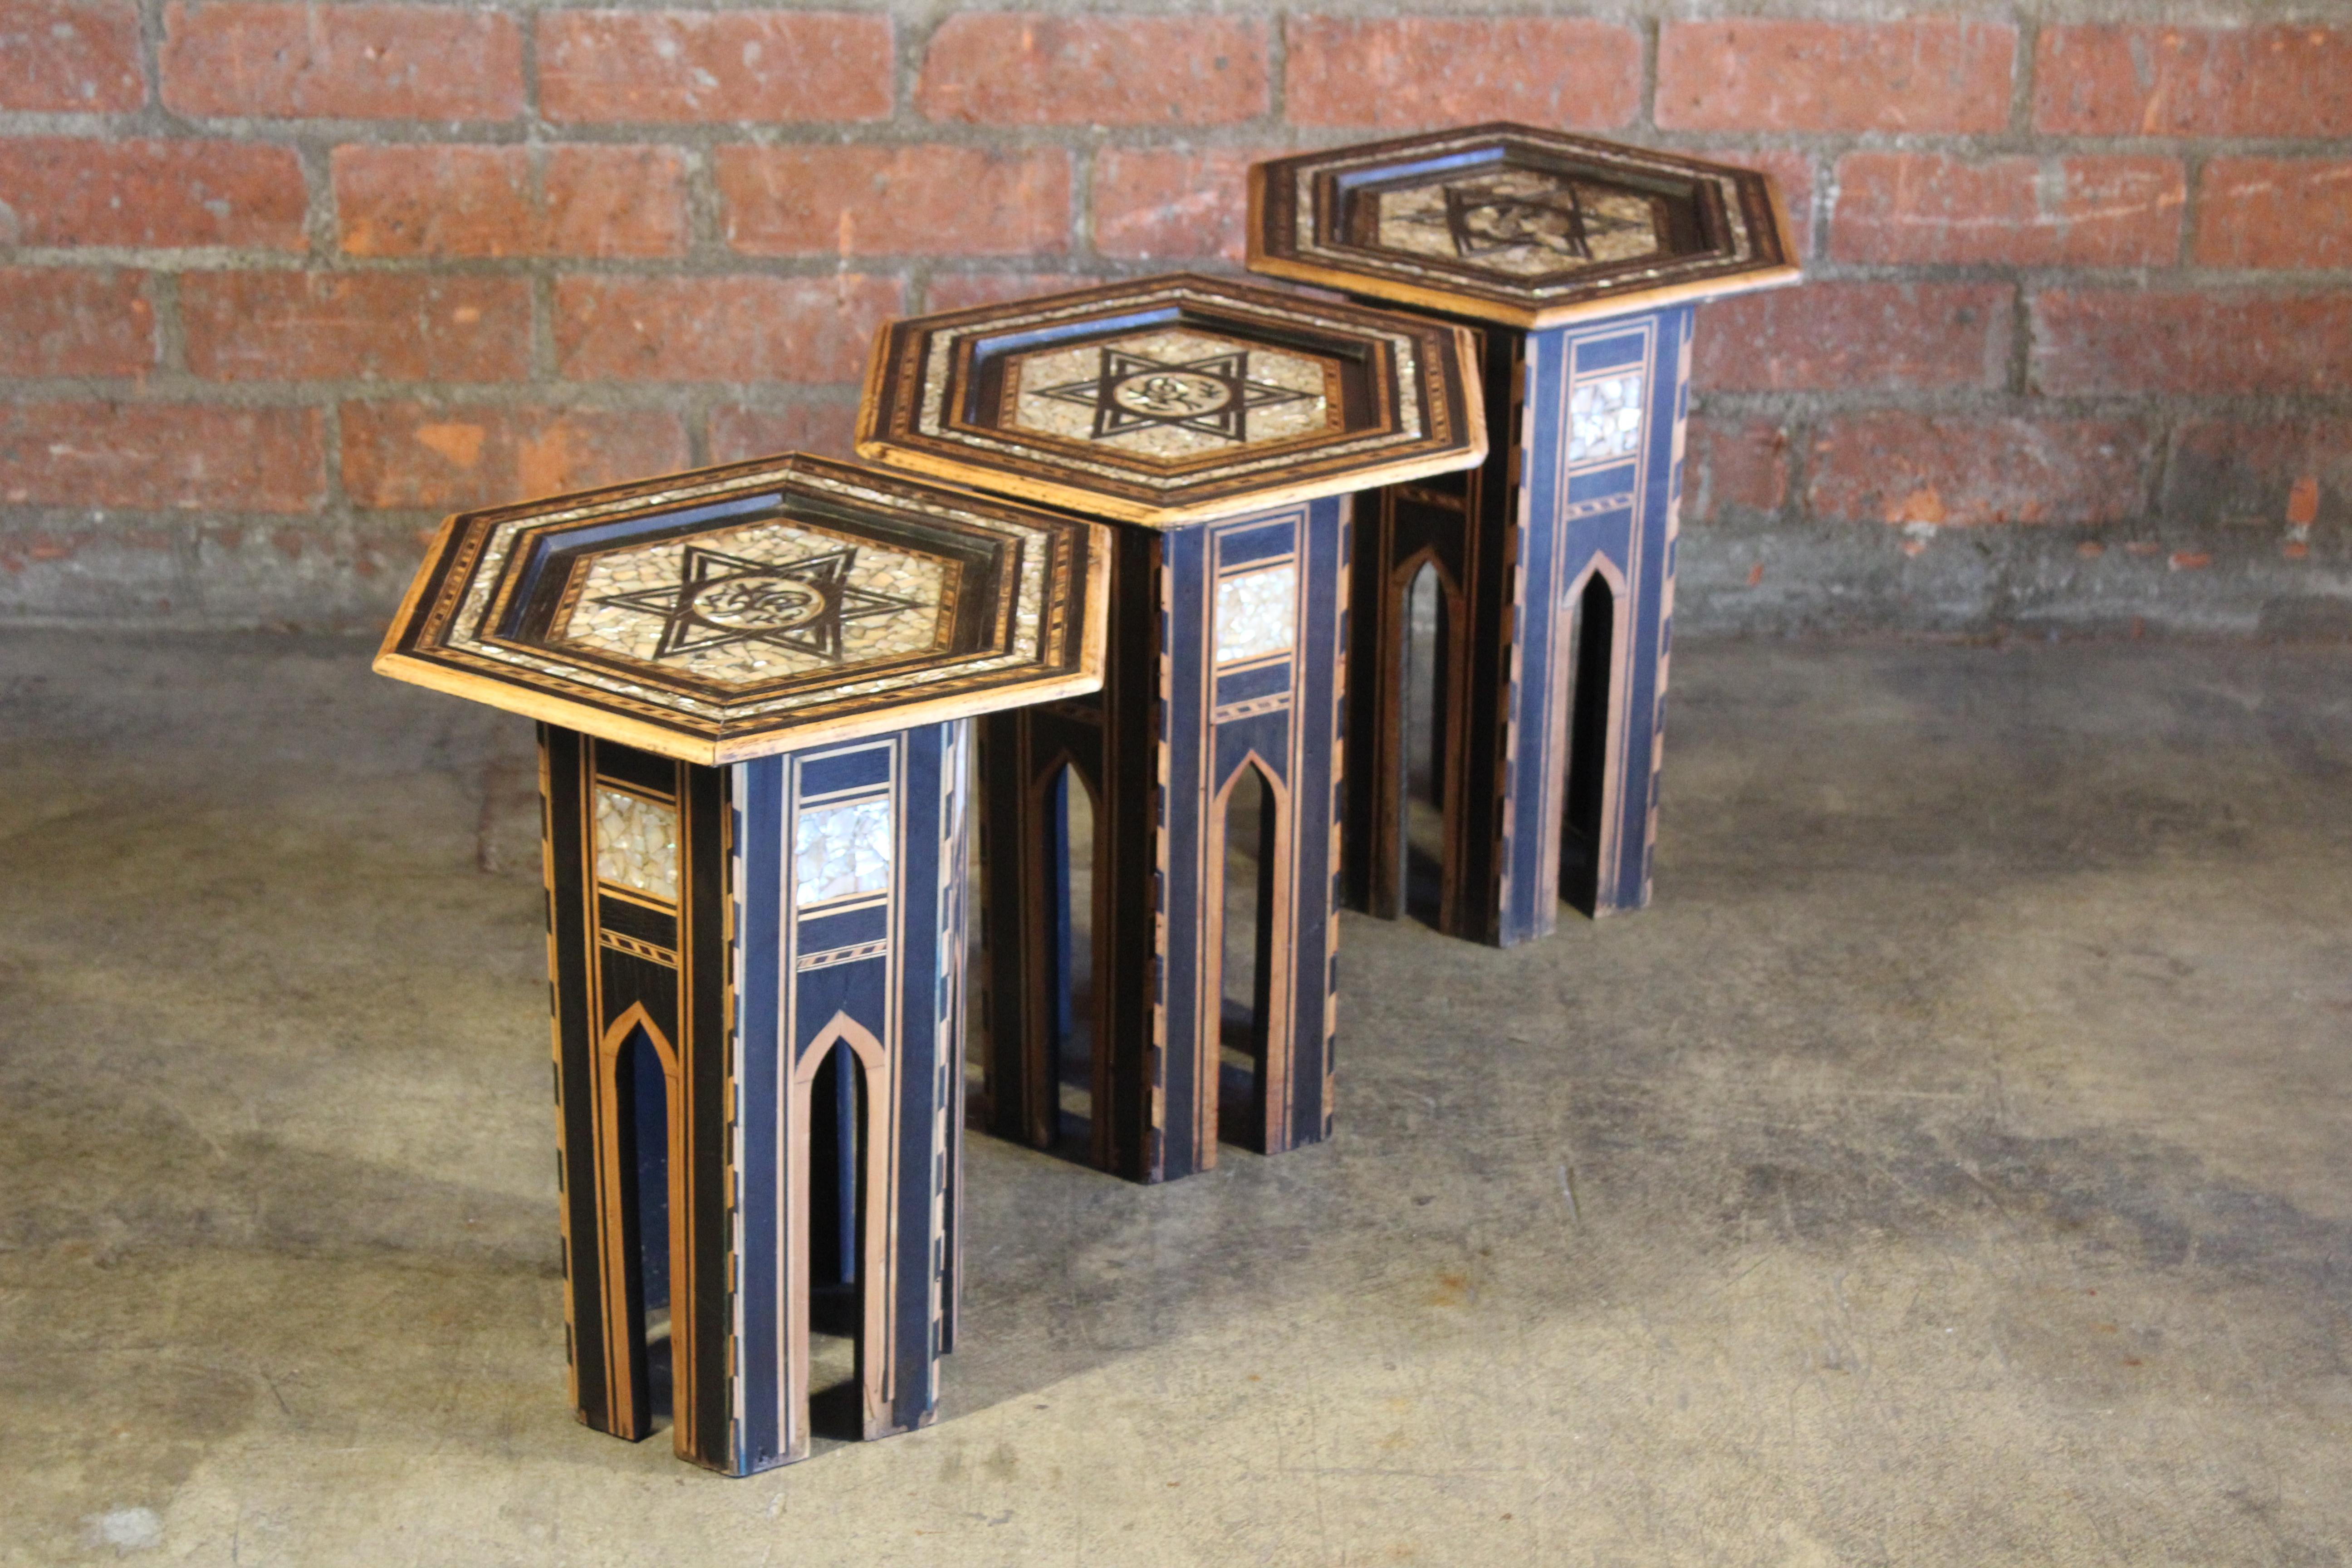 Antique inlaid wood and pearl Syrian side tables. Sold individually. In good condition with age appropriate wear. One table has a little more loss on the top in comparison to the other two.